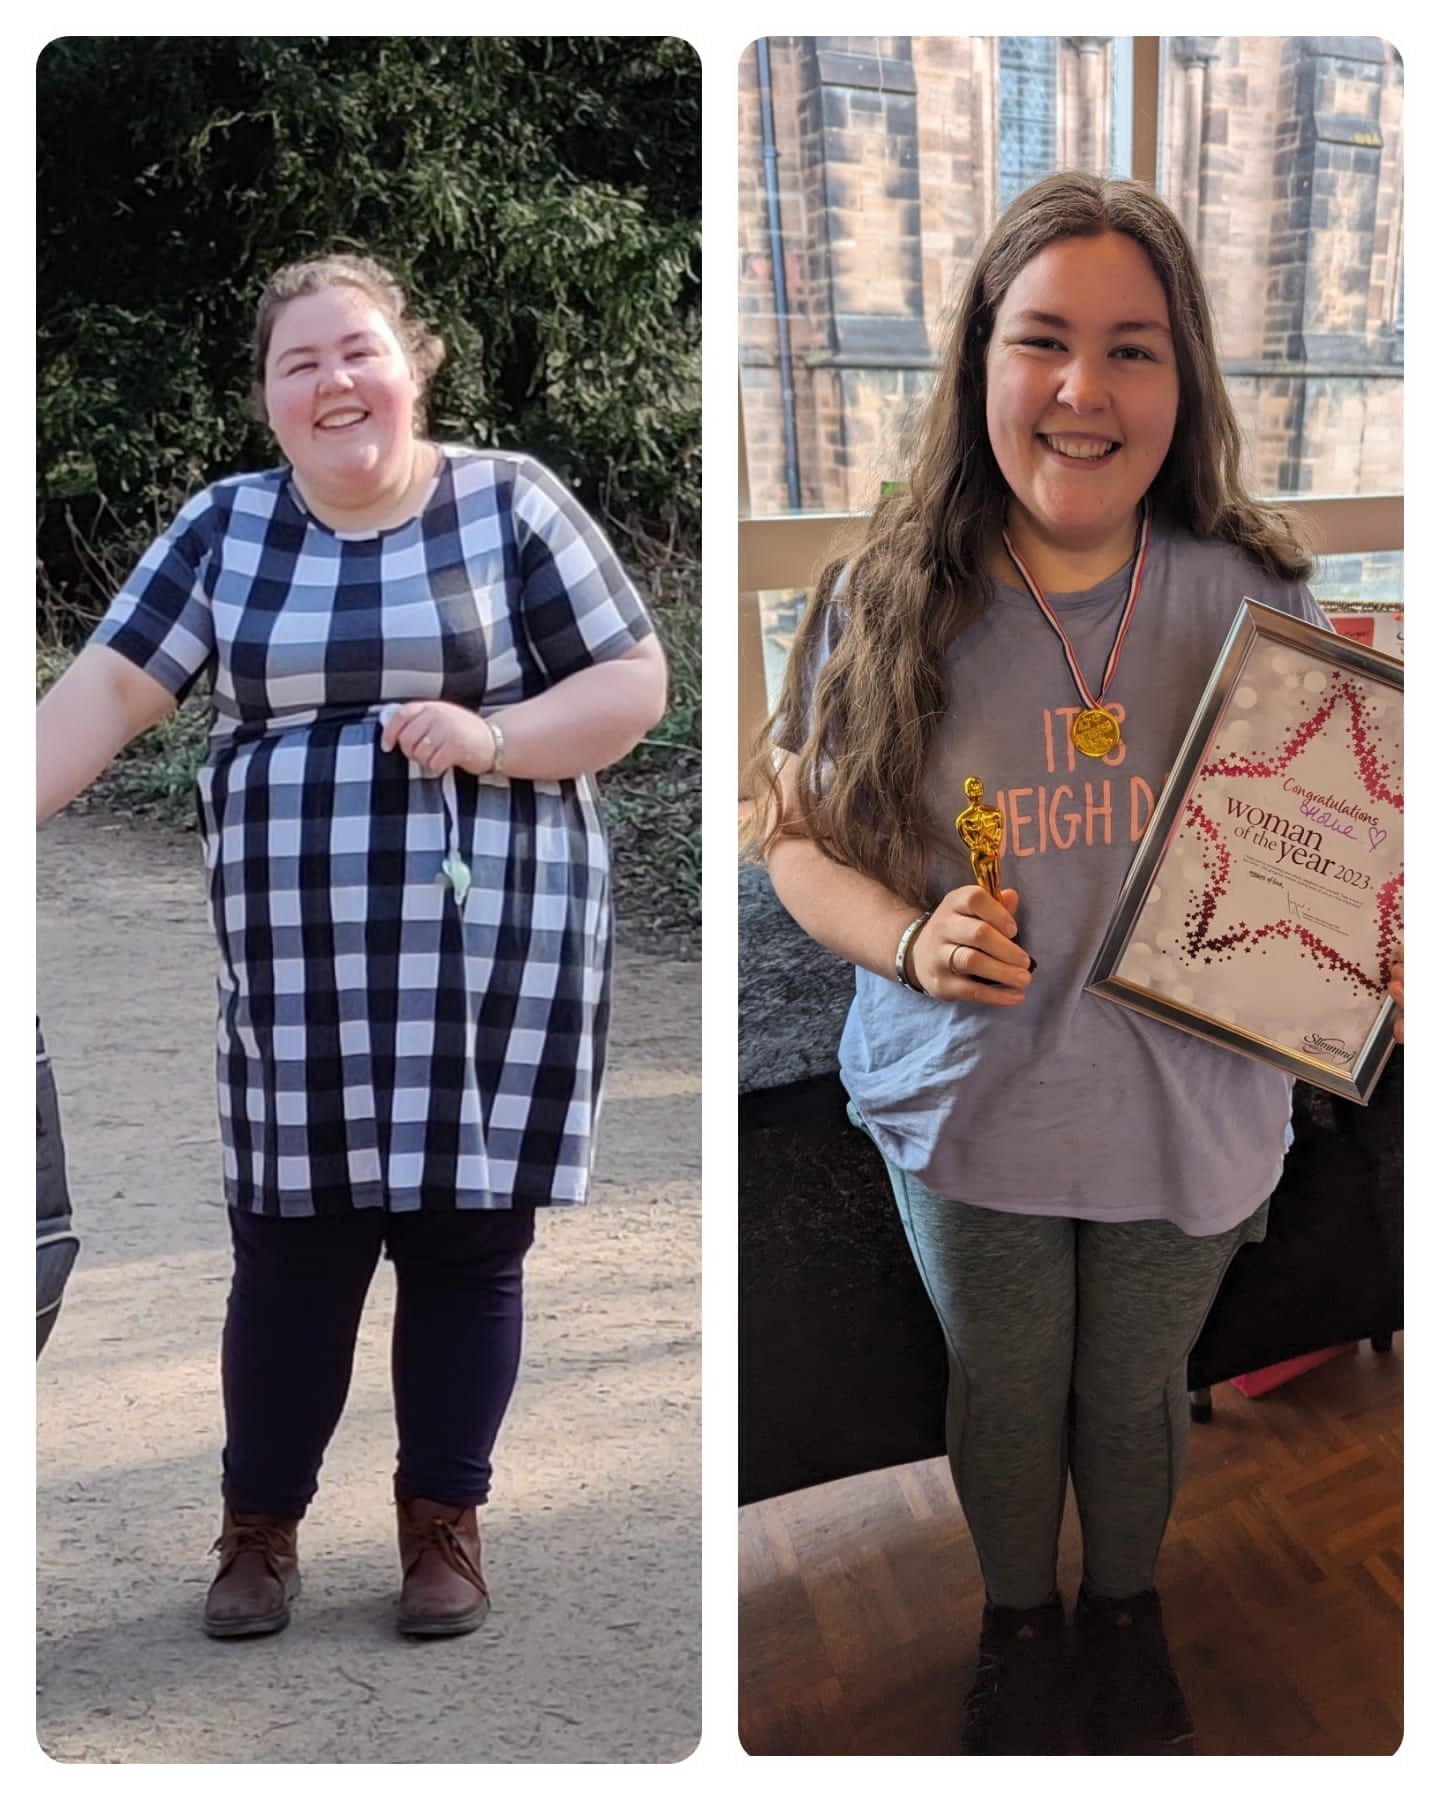 Hollie was named Miss Slinky after losing 4.5 stone.